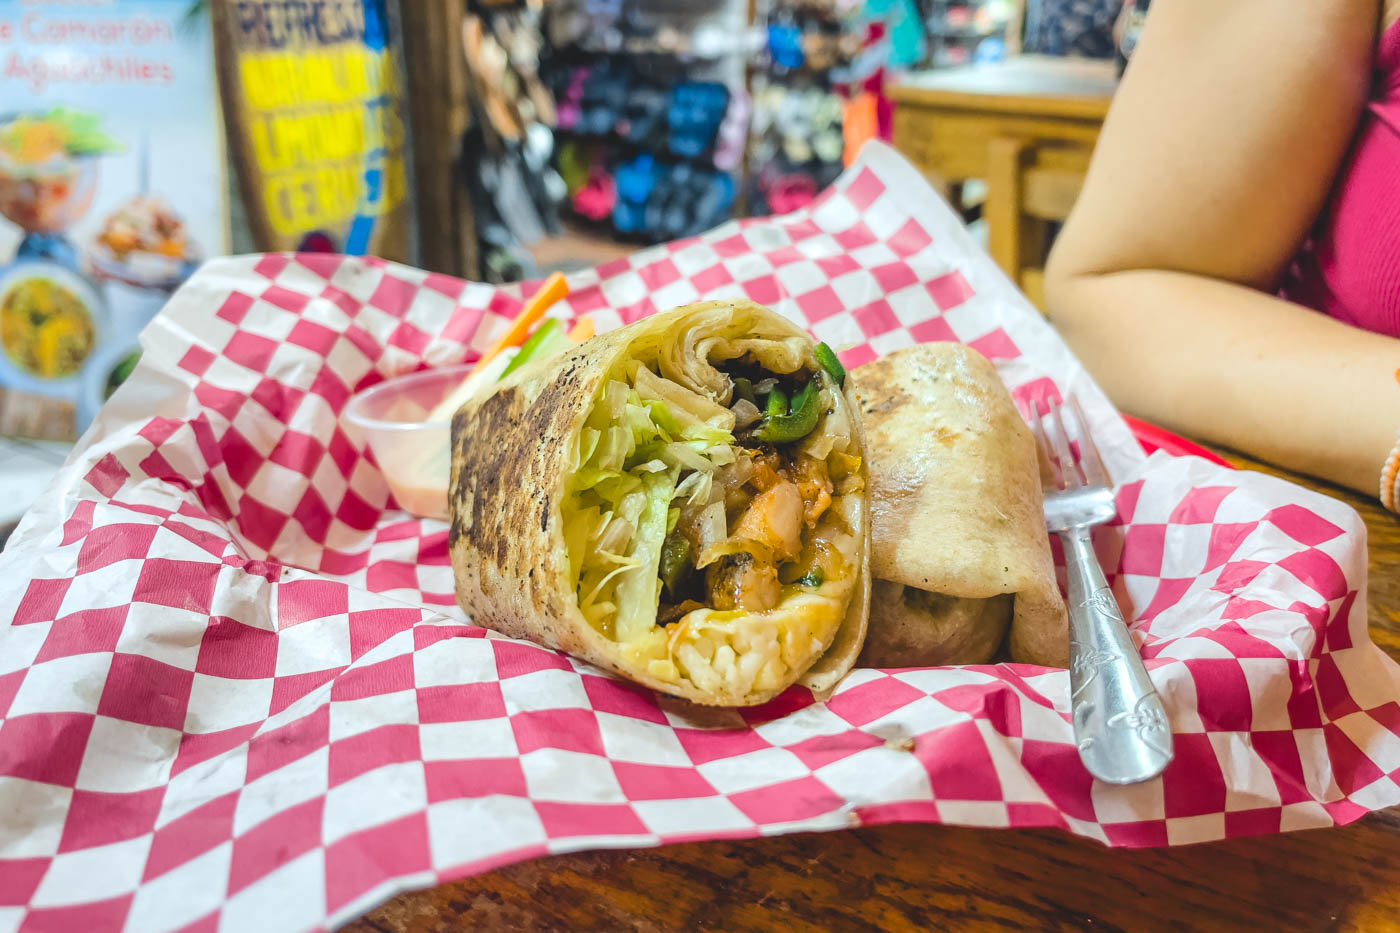 A stuffed burrito laying on a pink and white patchwork sheet in Burrito Beach restaurant.